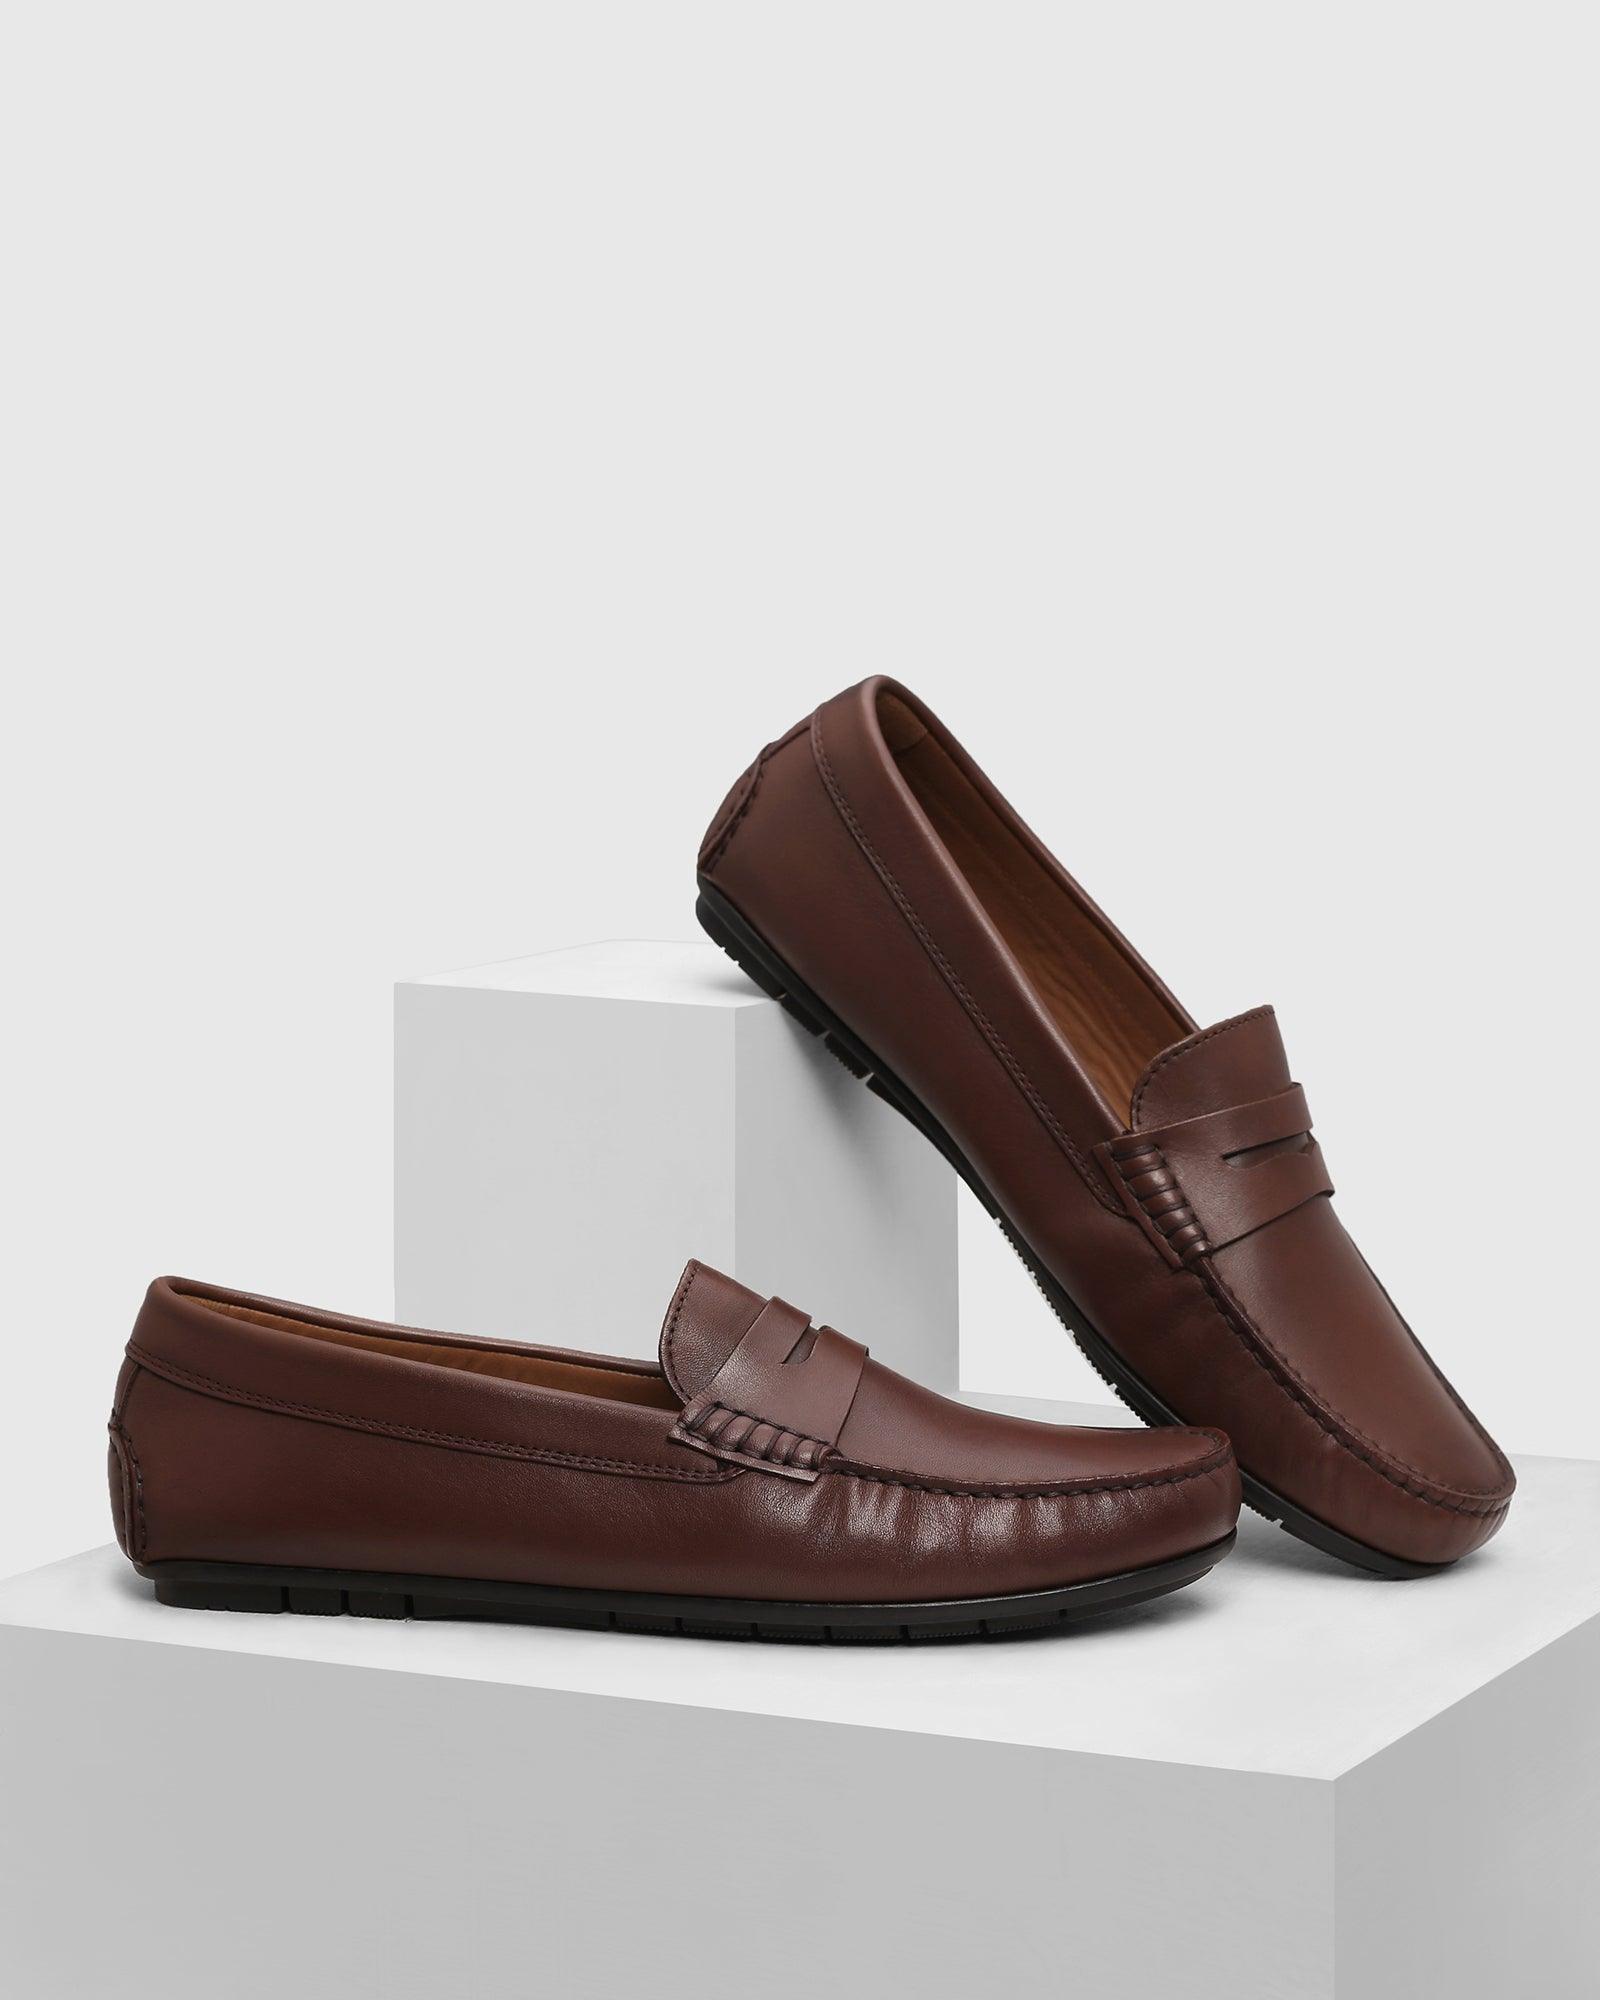 Leather Casual Brown Solid Loafers Shoes - Park